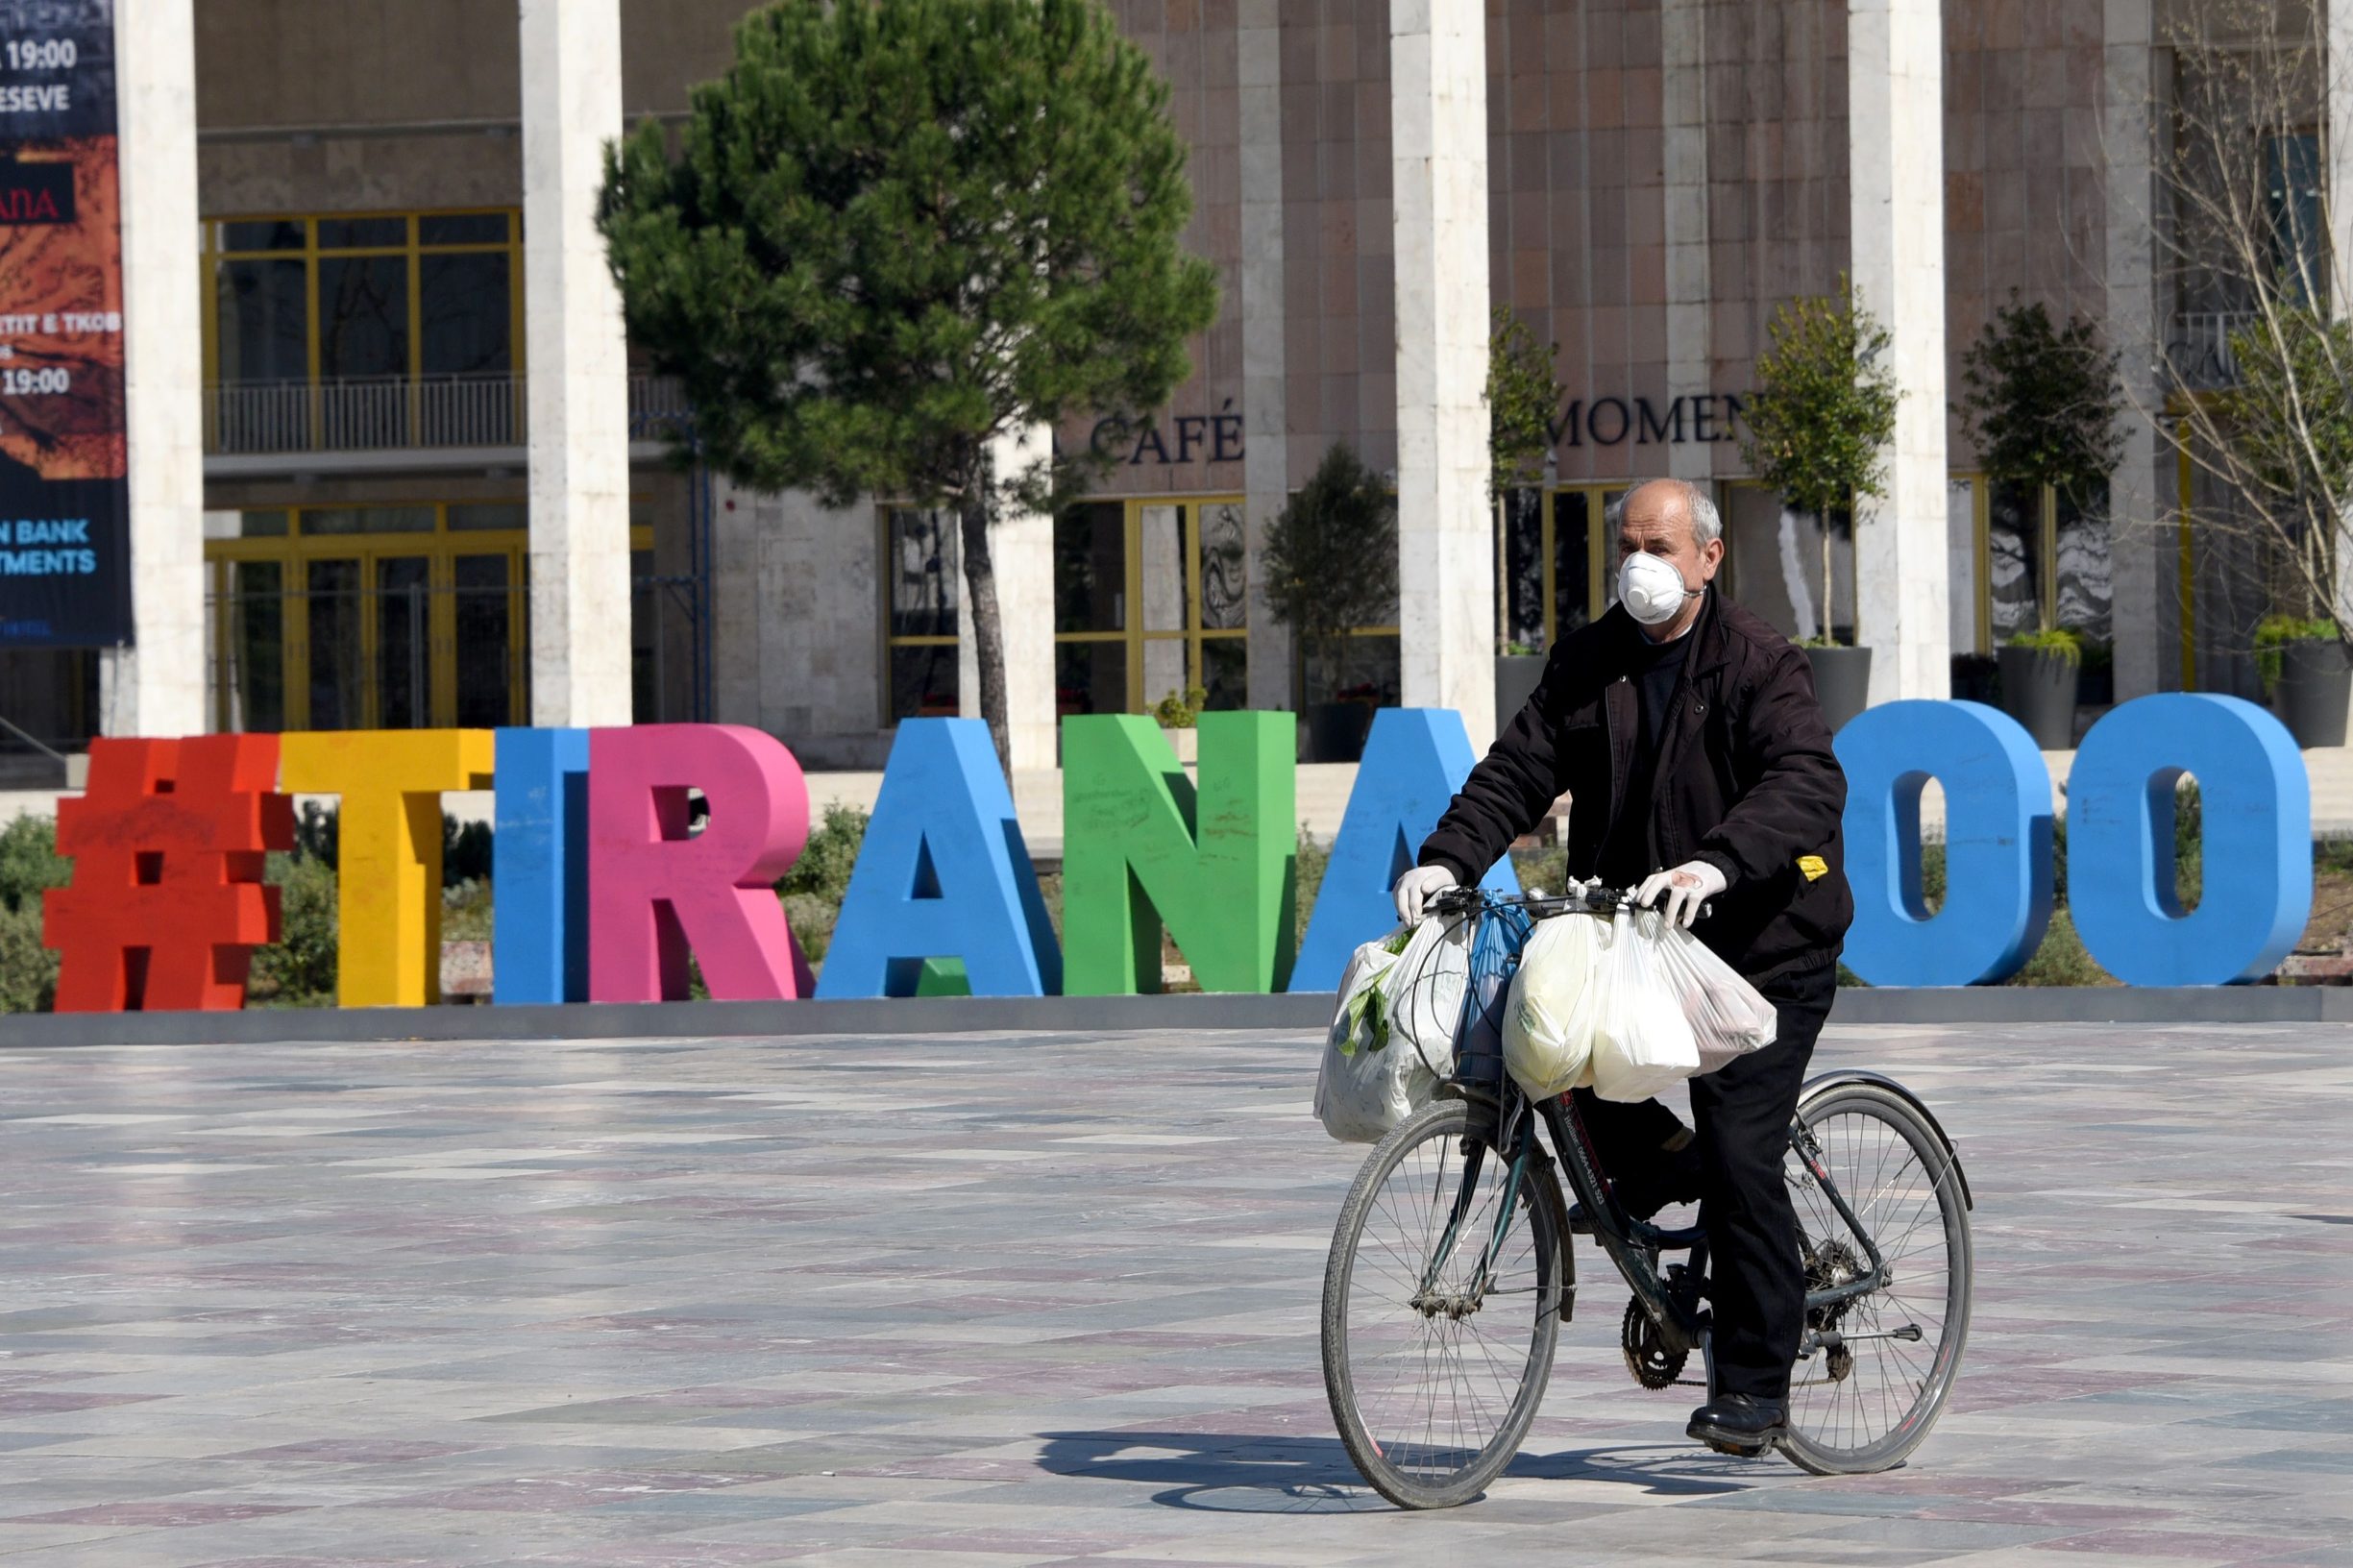 A man wearing protective mask rides his bicycle in Tirana's main square on March 12, 2020. - Albania has banned the circulation of all cars (except ambulances and supplies) for 3 days as it adds on more restrictive measures to prevent the spread of the coronavirus after the number of infected people raised to 23. Hefty fines of the euro 5000 have been imposed for those found breaching the rules. (Photo by Gent SHKULLAKU / AFP)